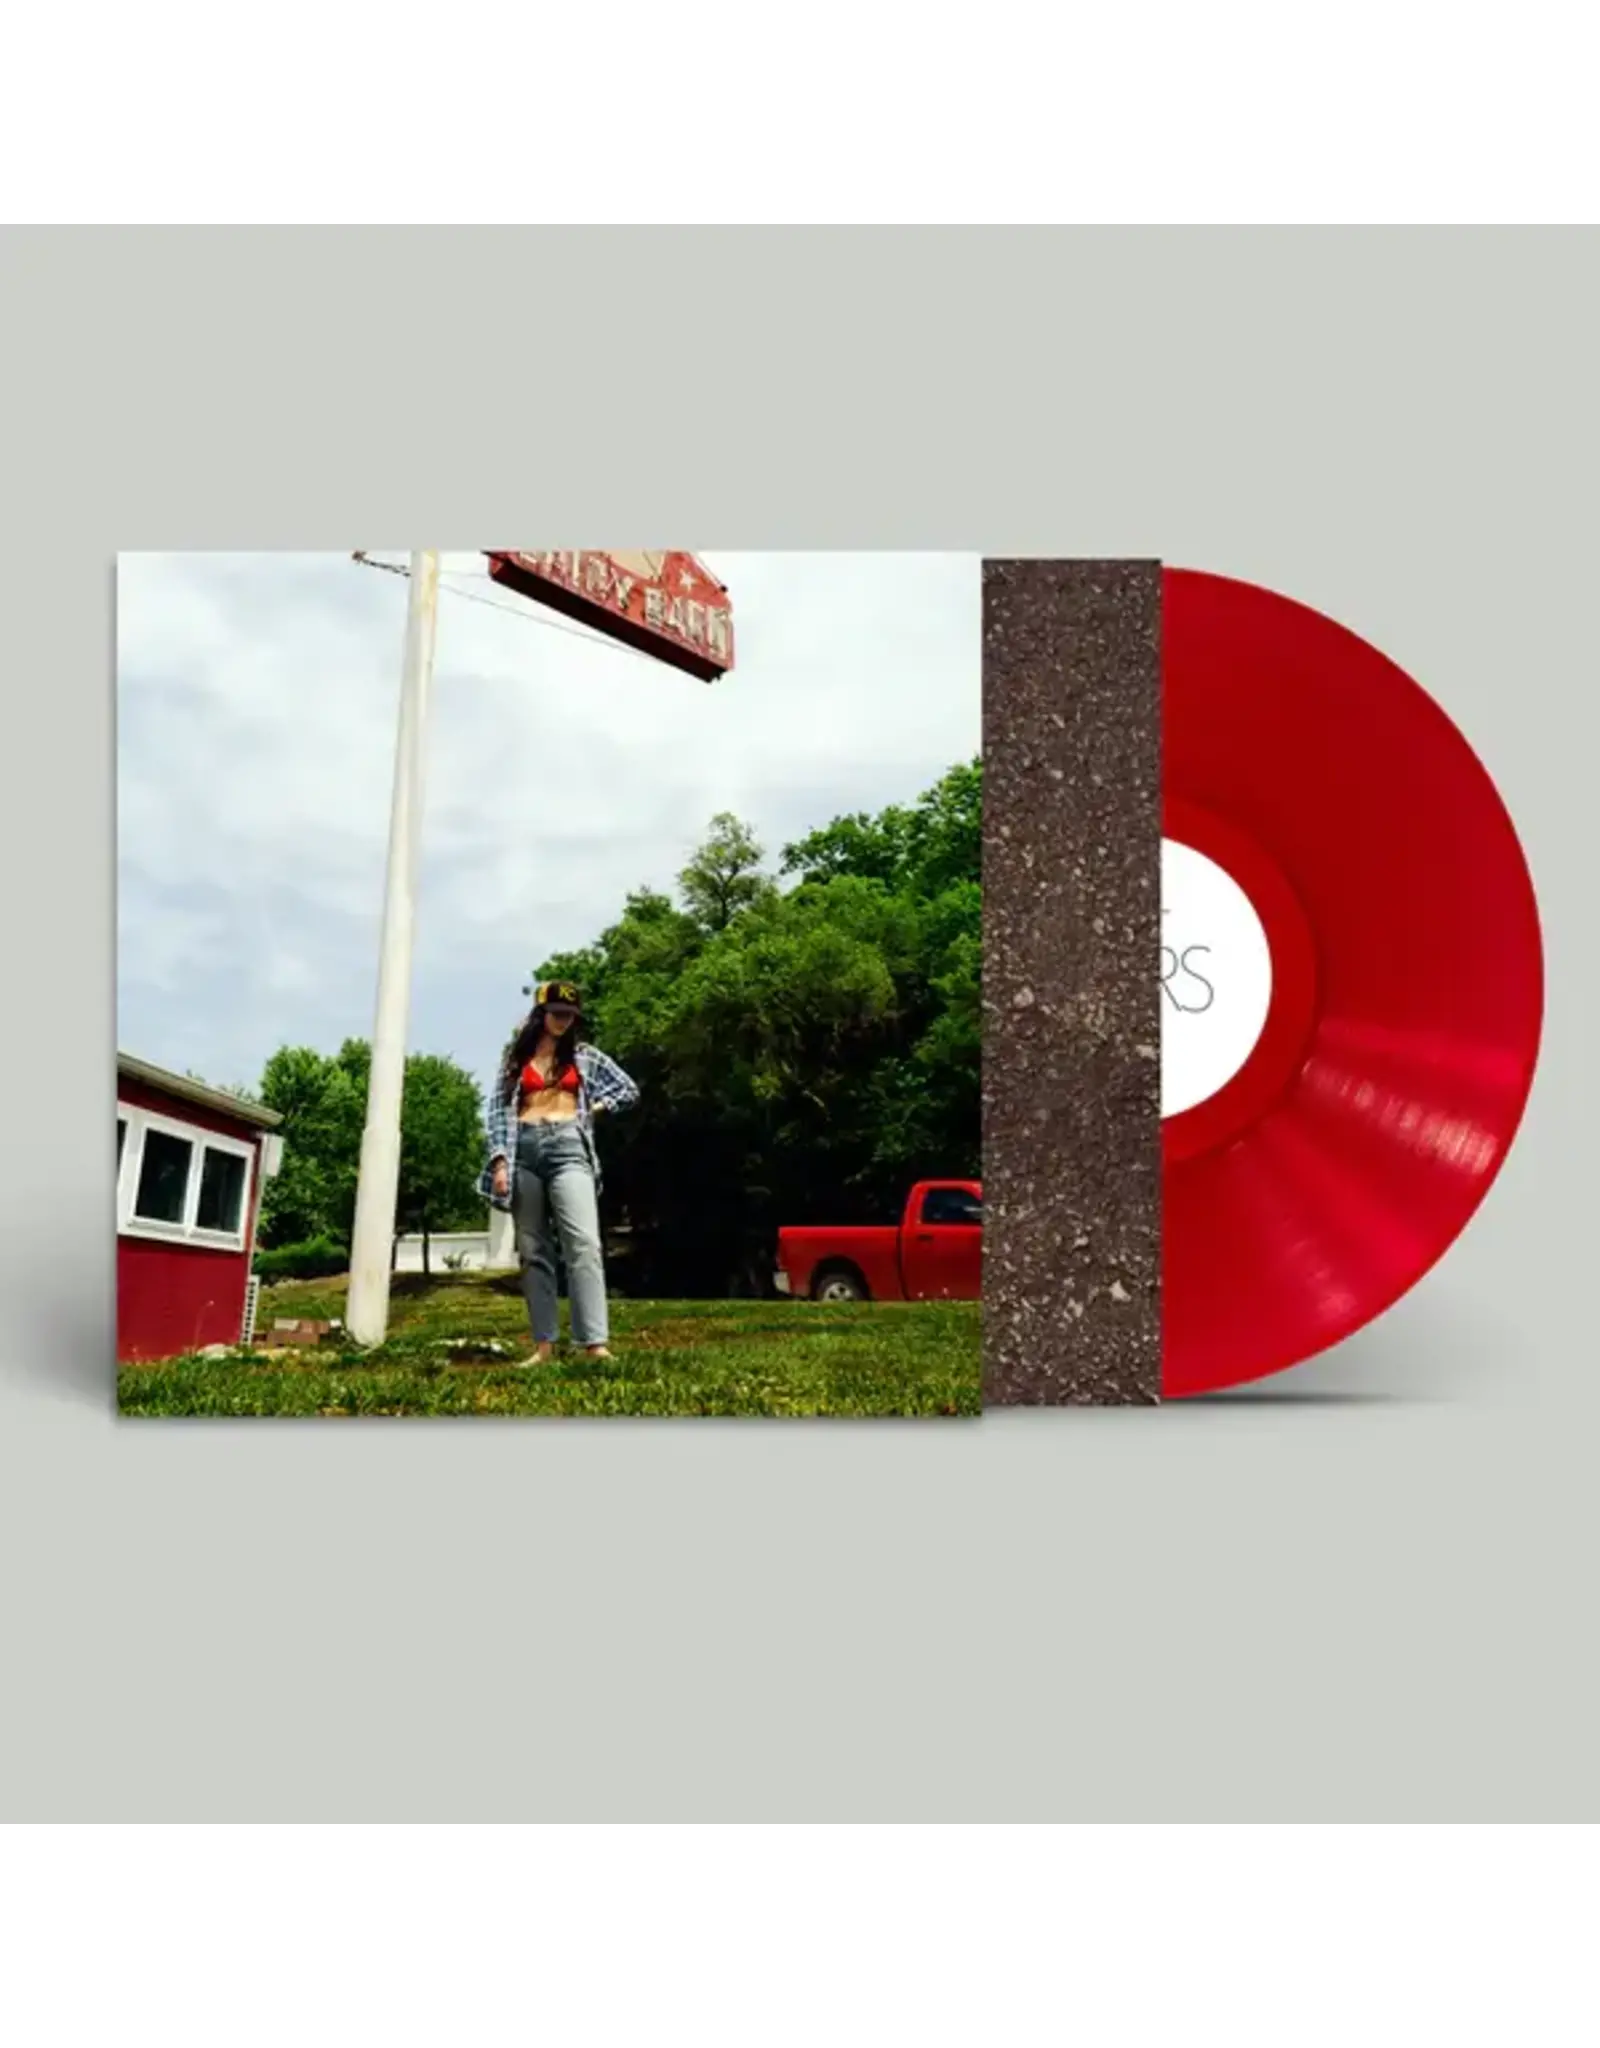 Tigers Blood (Red Edition) (Vinyl)